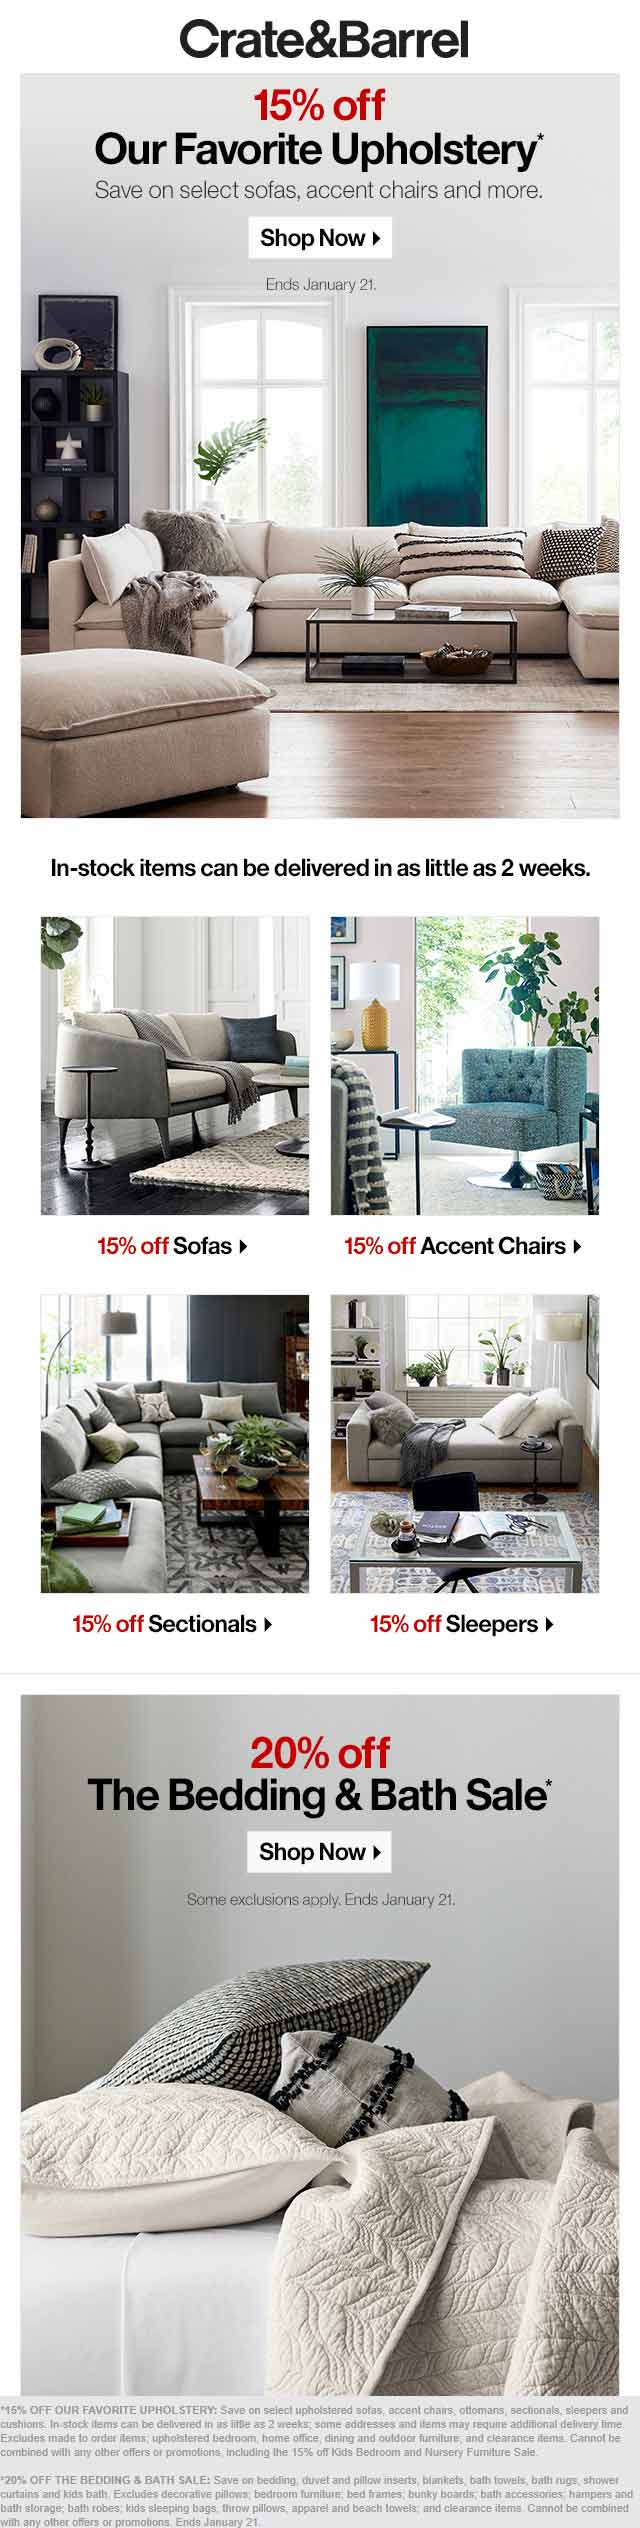 Crate & Barrel coupons & promo code for [October 2022]